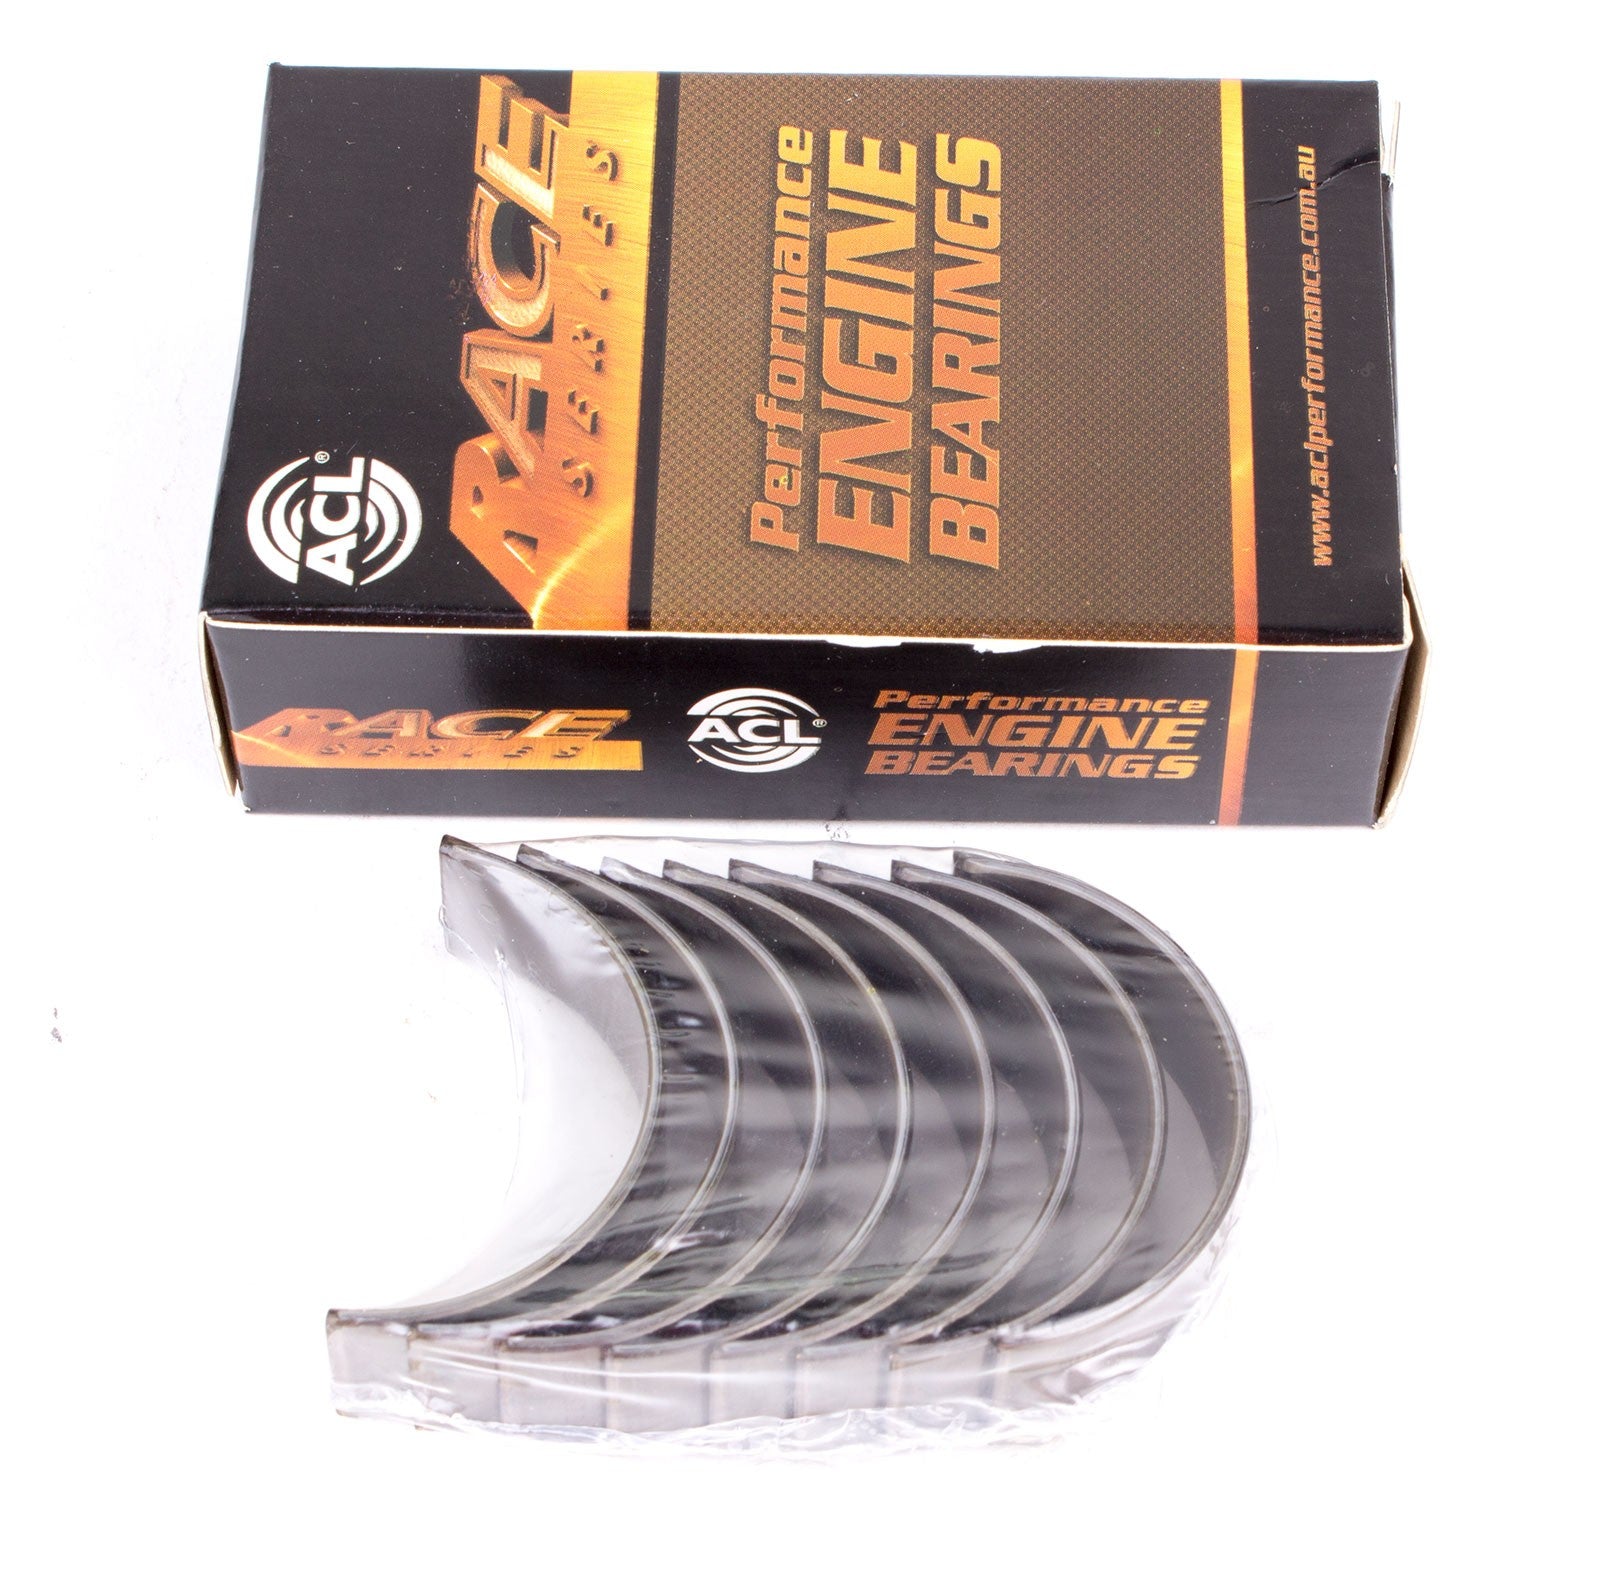 ACL 5M7298H-01 Main bearing set (ACL Race Series) Photo-0 